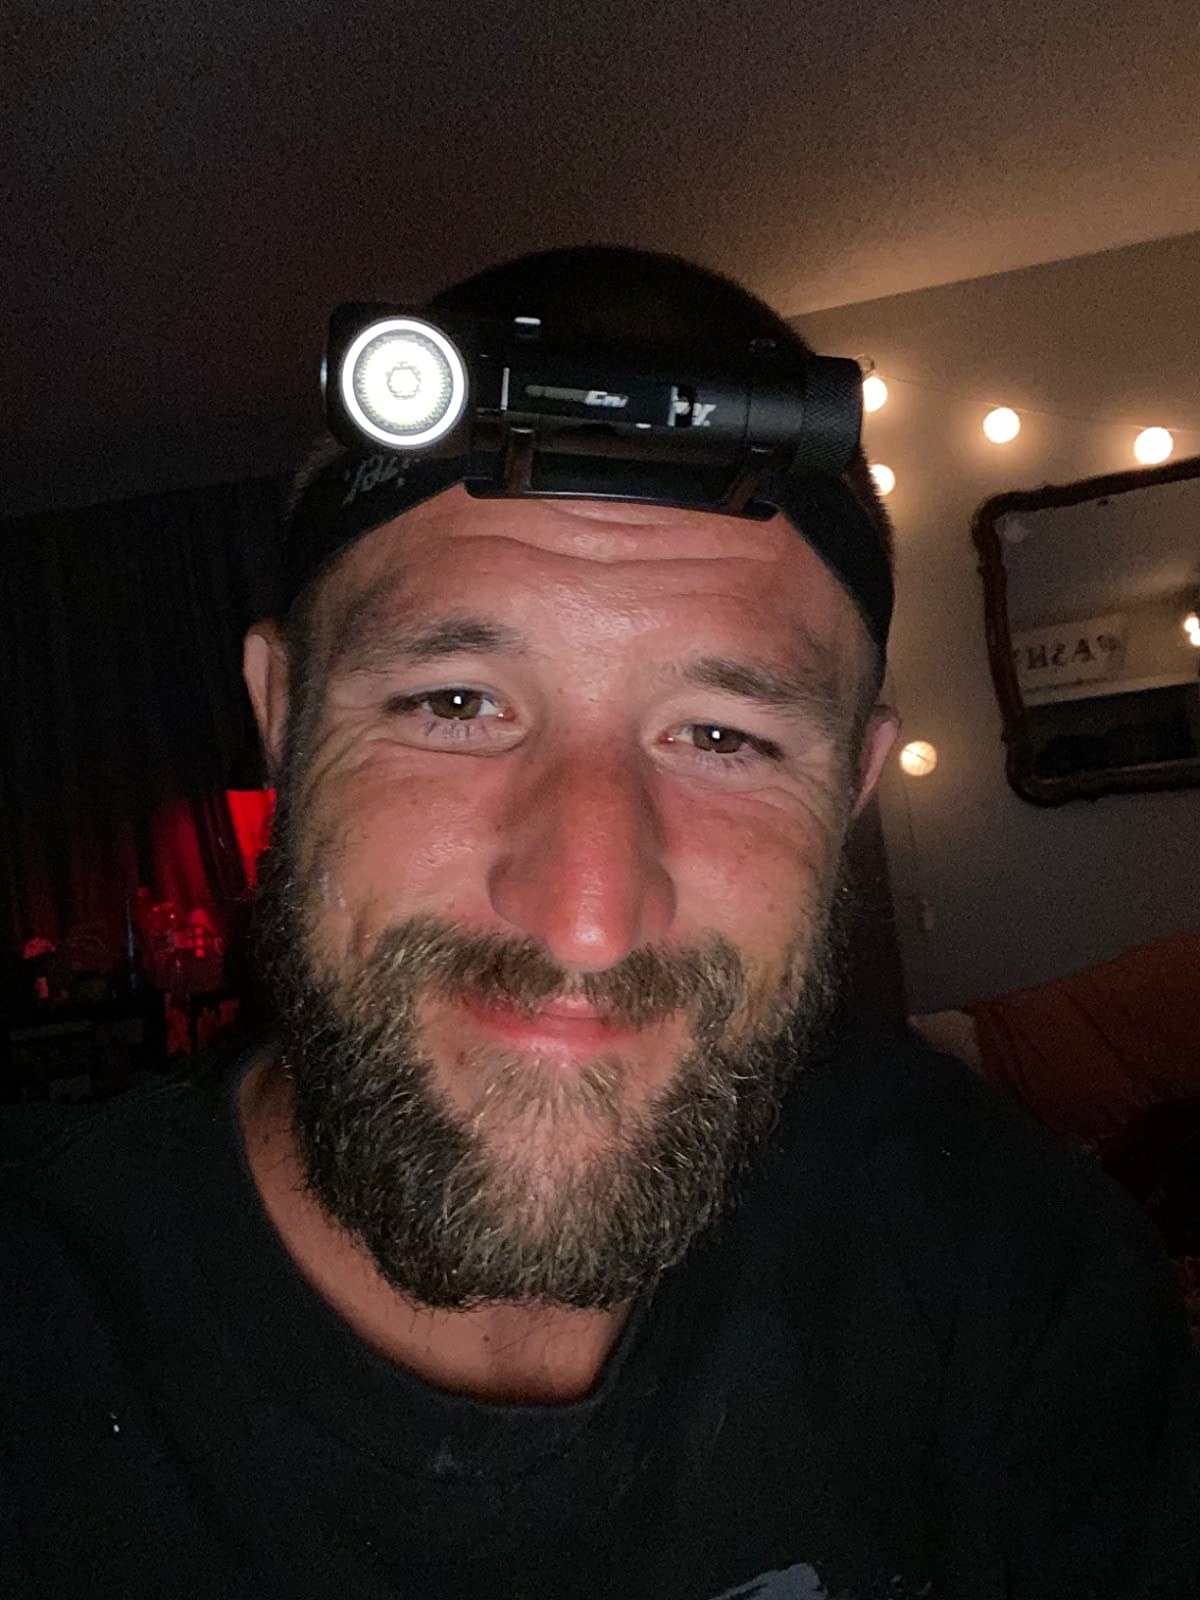 Reviewer wearing the headlamp